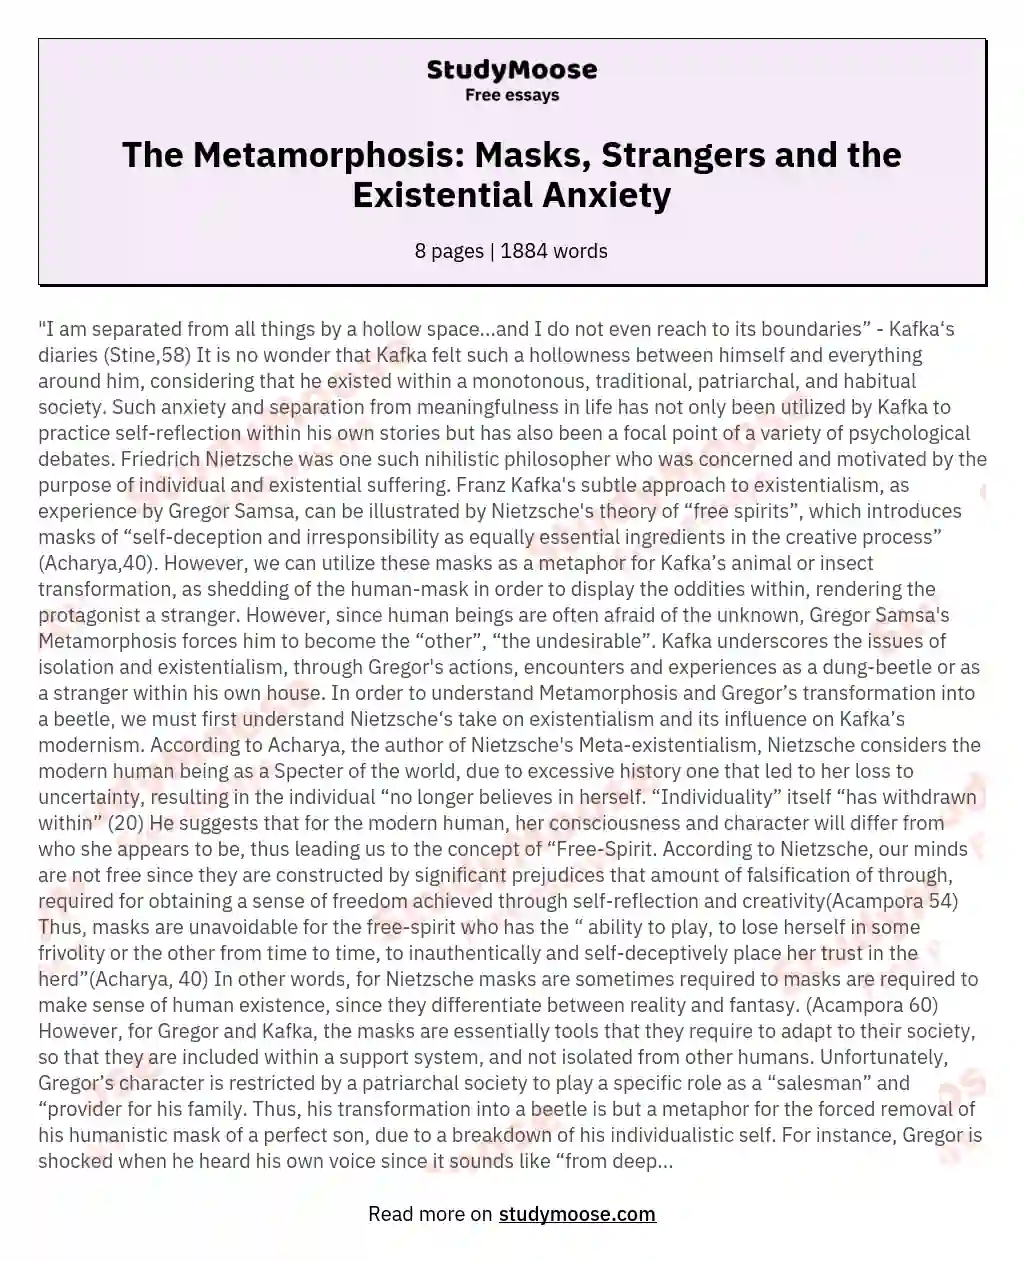 The Metamorphosis: Masks, Strangers and the Existential Anxiety